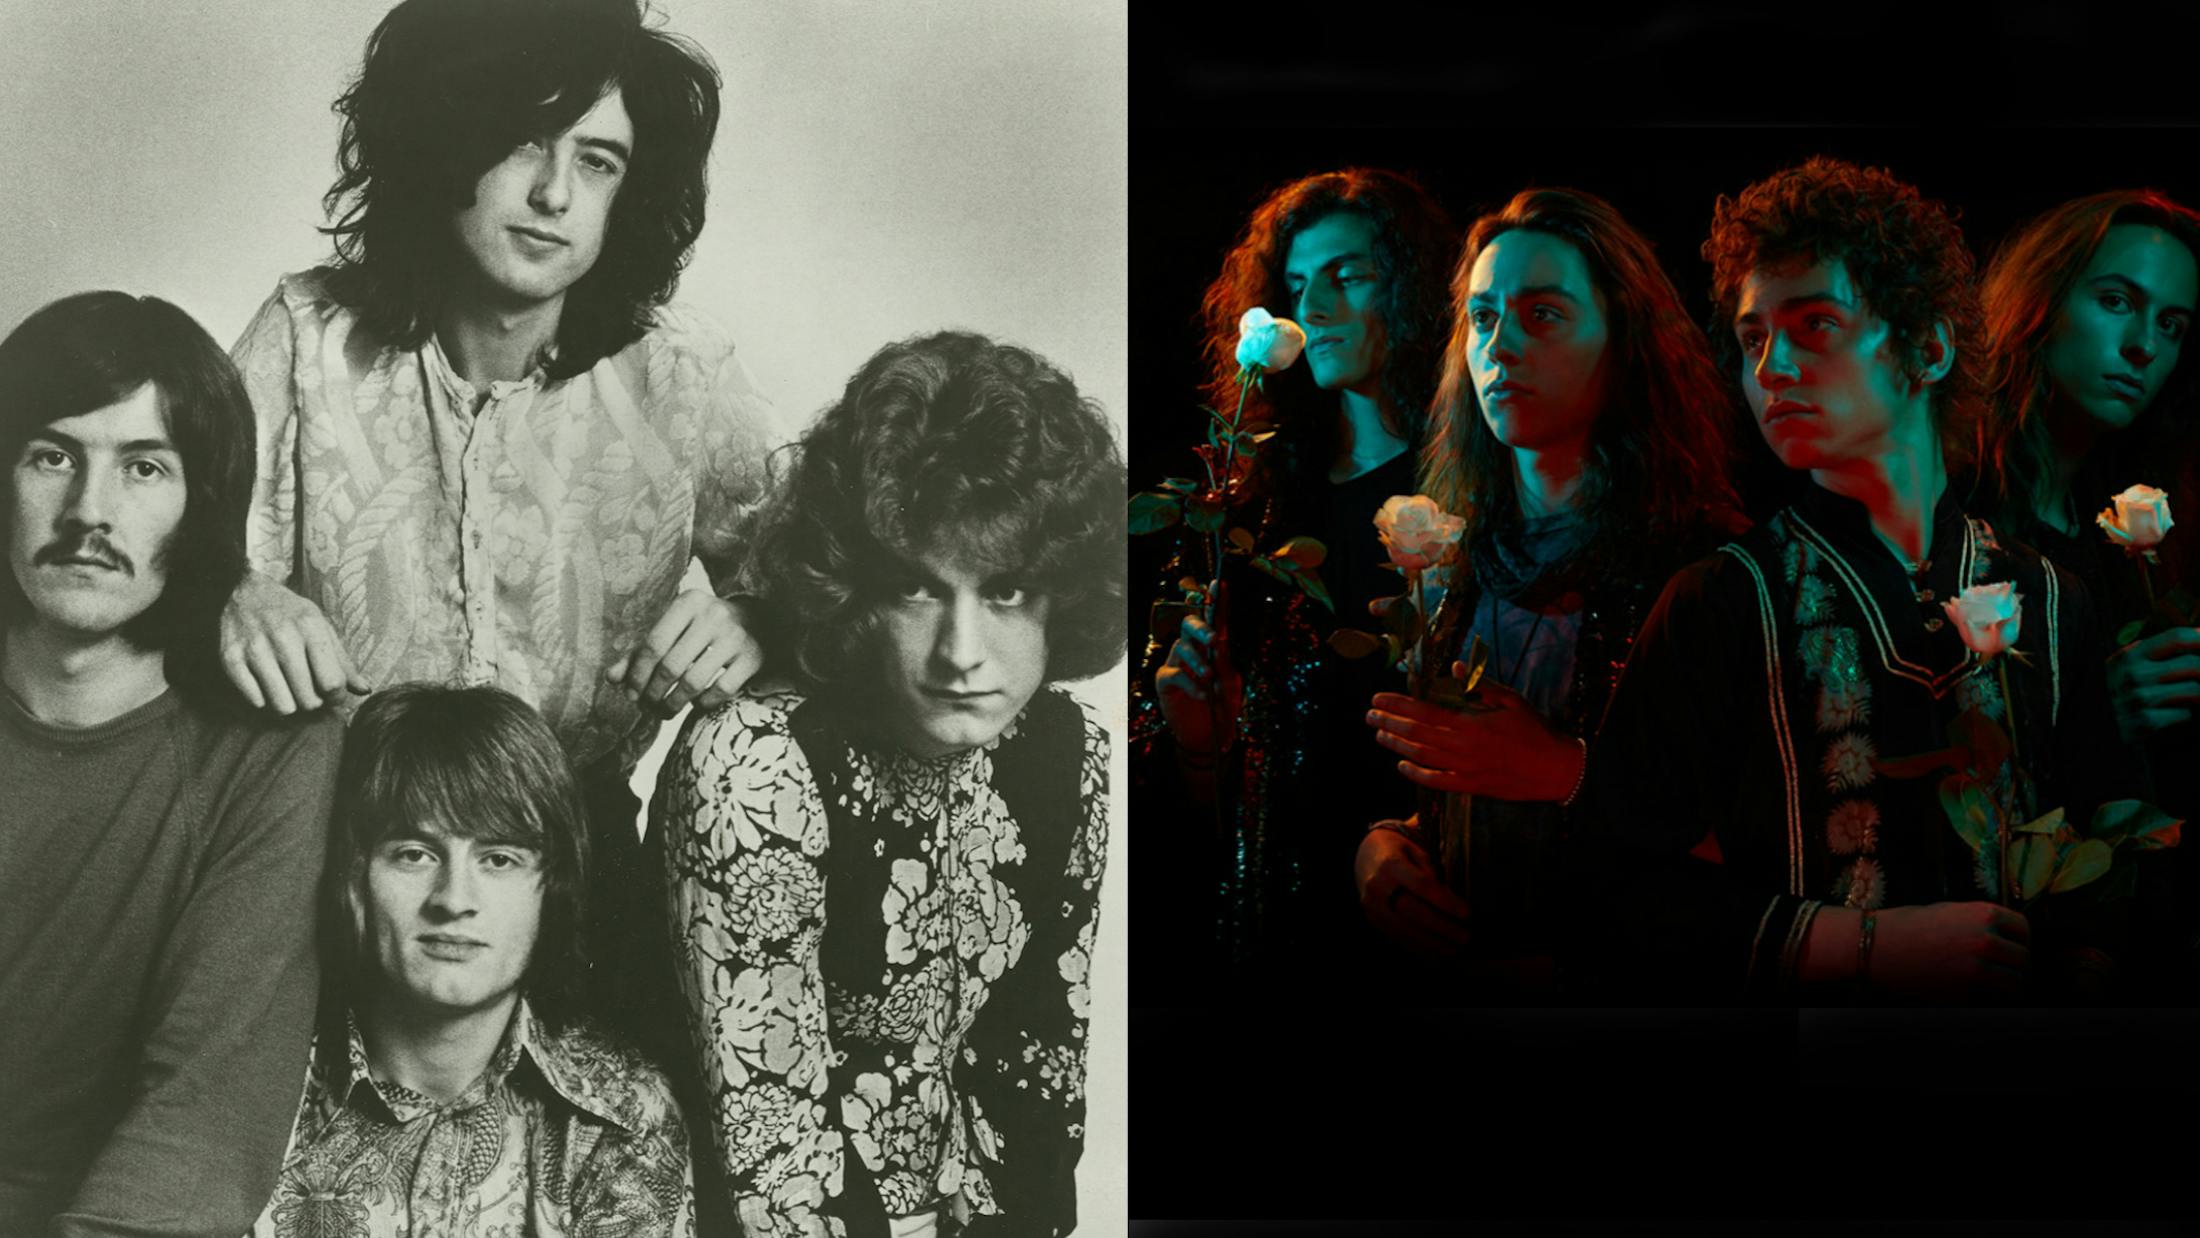 Someone's Created a Greta Van Fleet x Led Zeppelin Mash-Up And We Don't Know What To Think